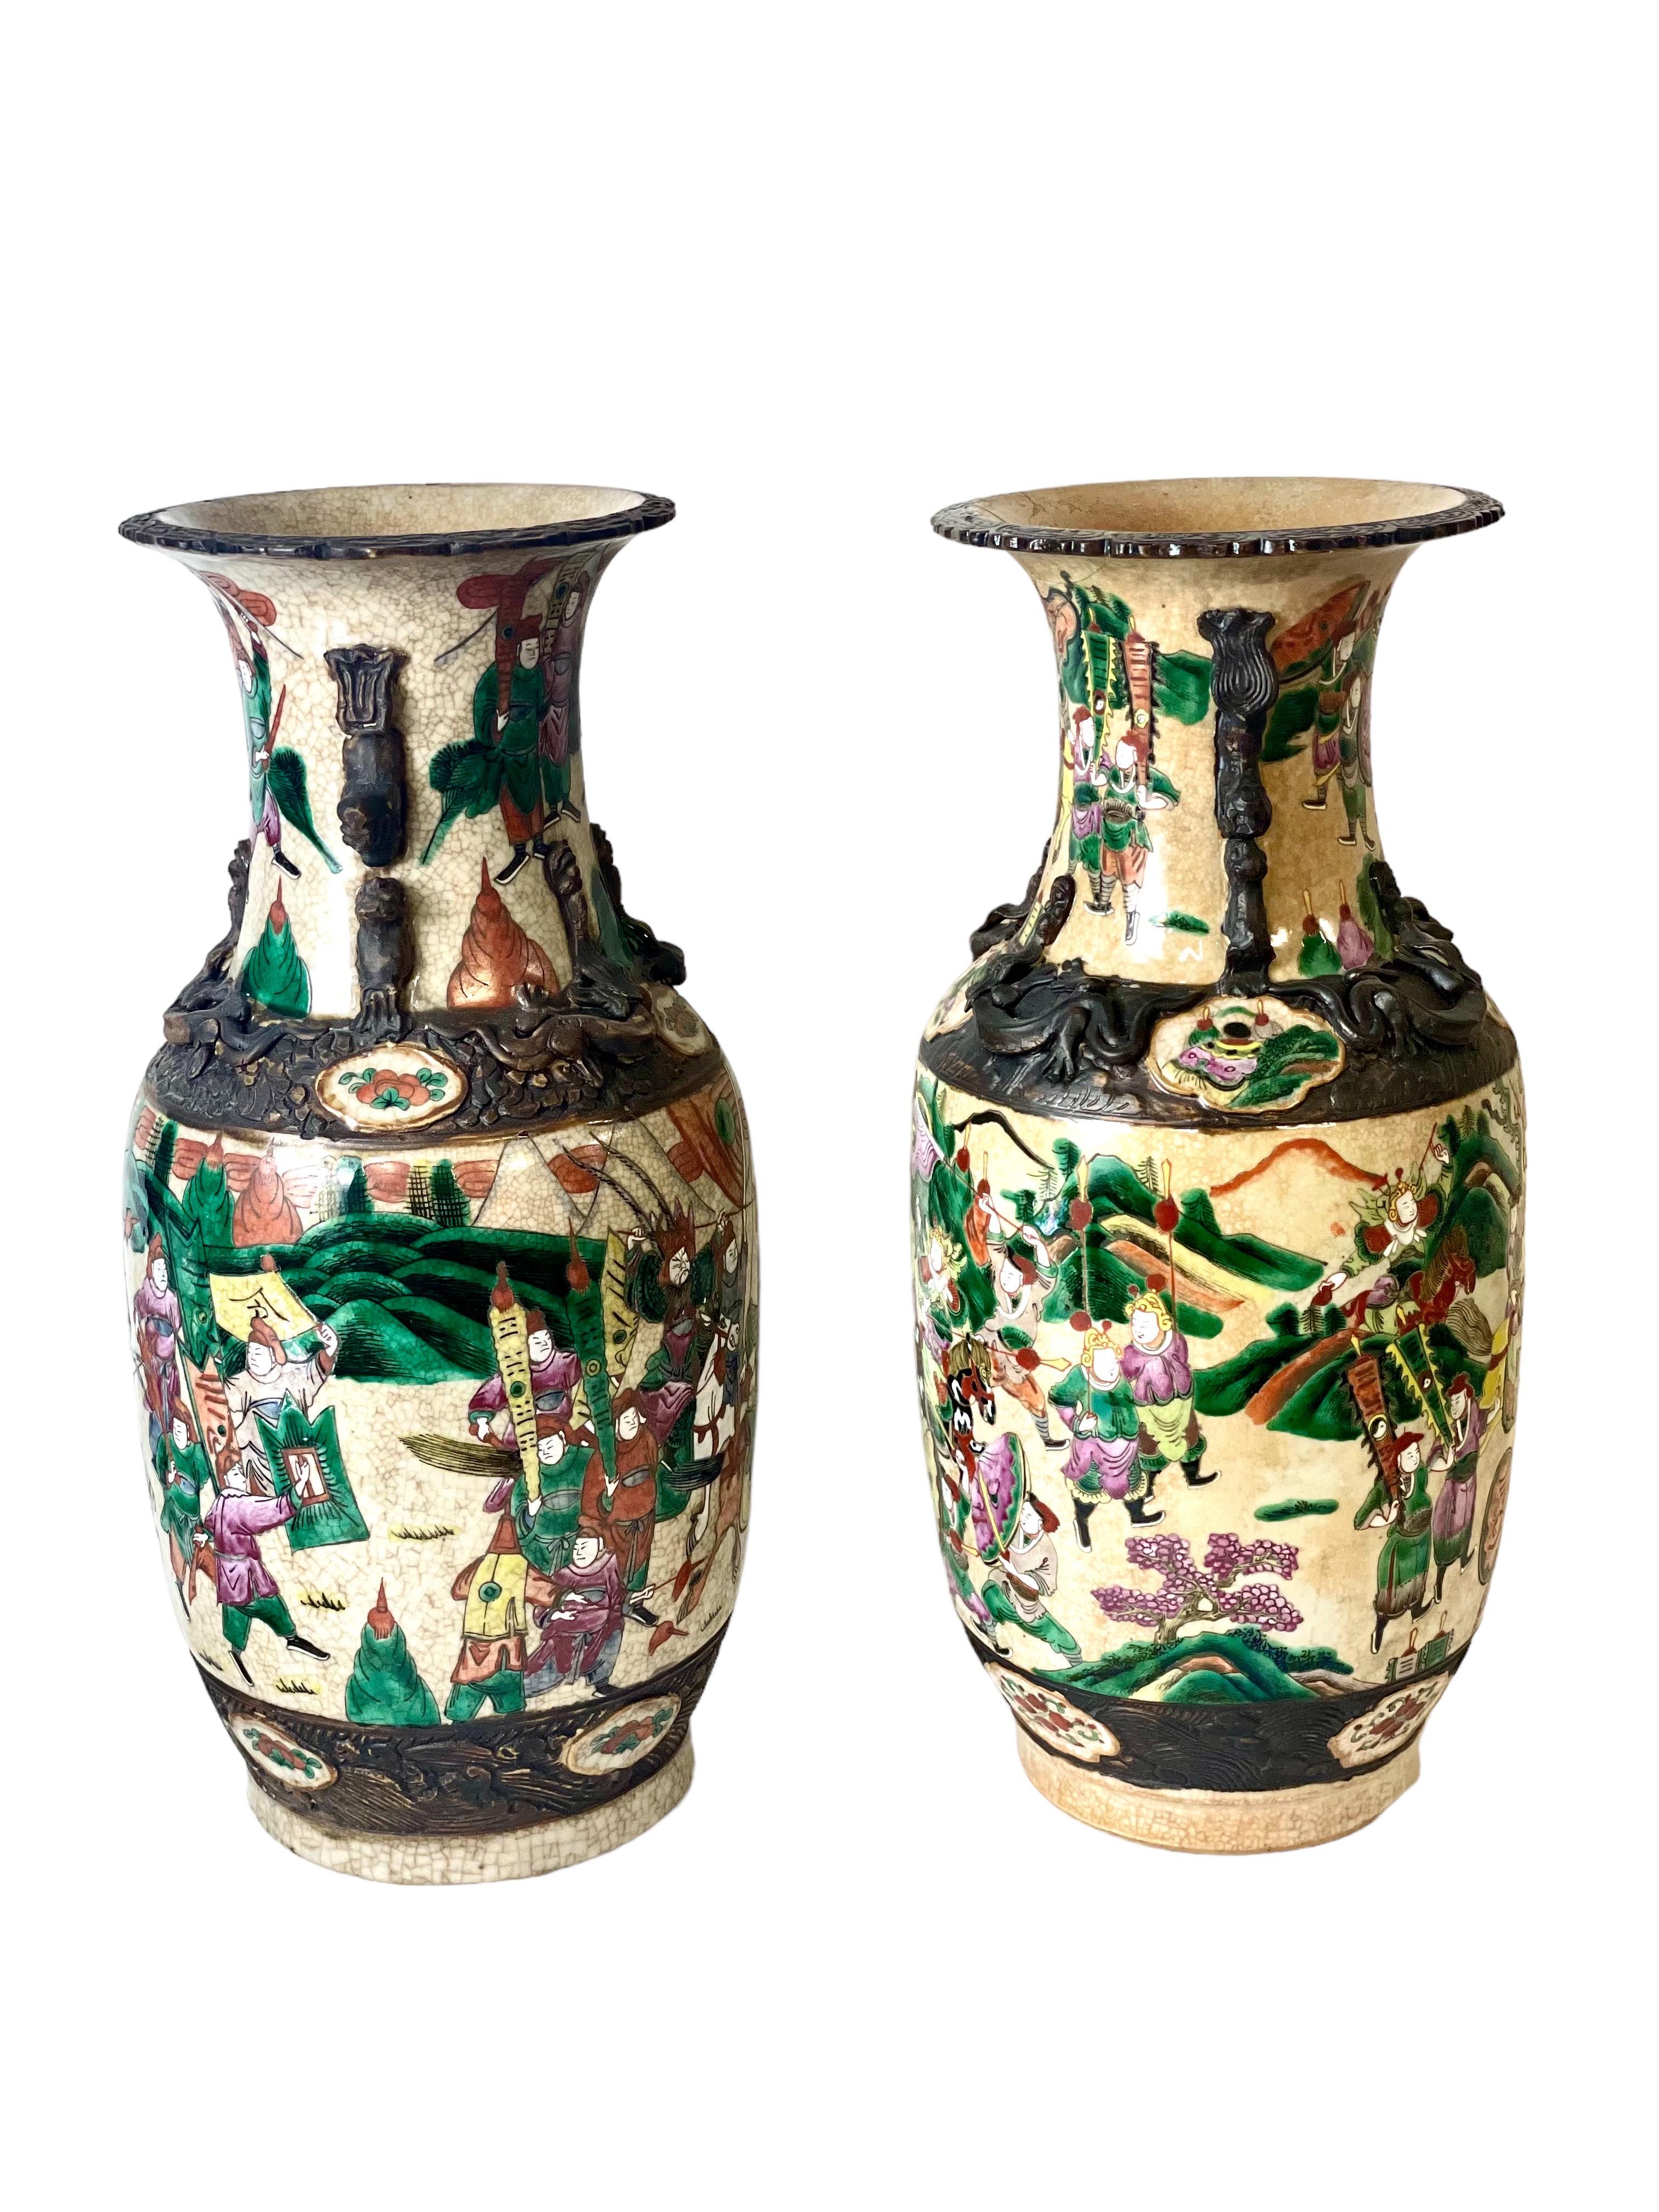 A pair of large ceramic Chinese crackle glaze baluster vases, commonly known as 'Nanjing' porcelain. Dating from the 19th century, these elegant polychrome enamelled vases are decorated on their lower half with traditional scenes of jousting, combat